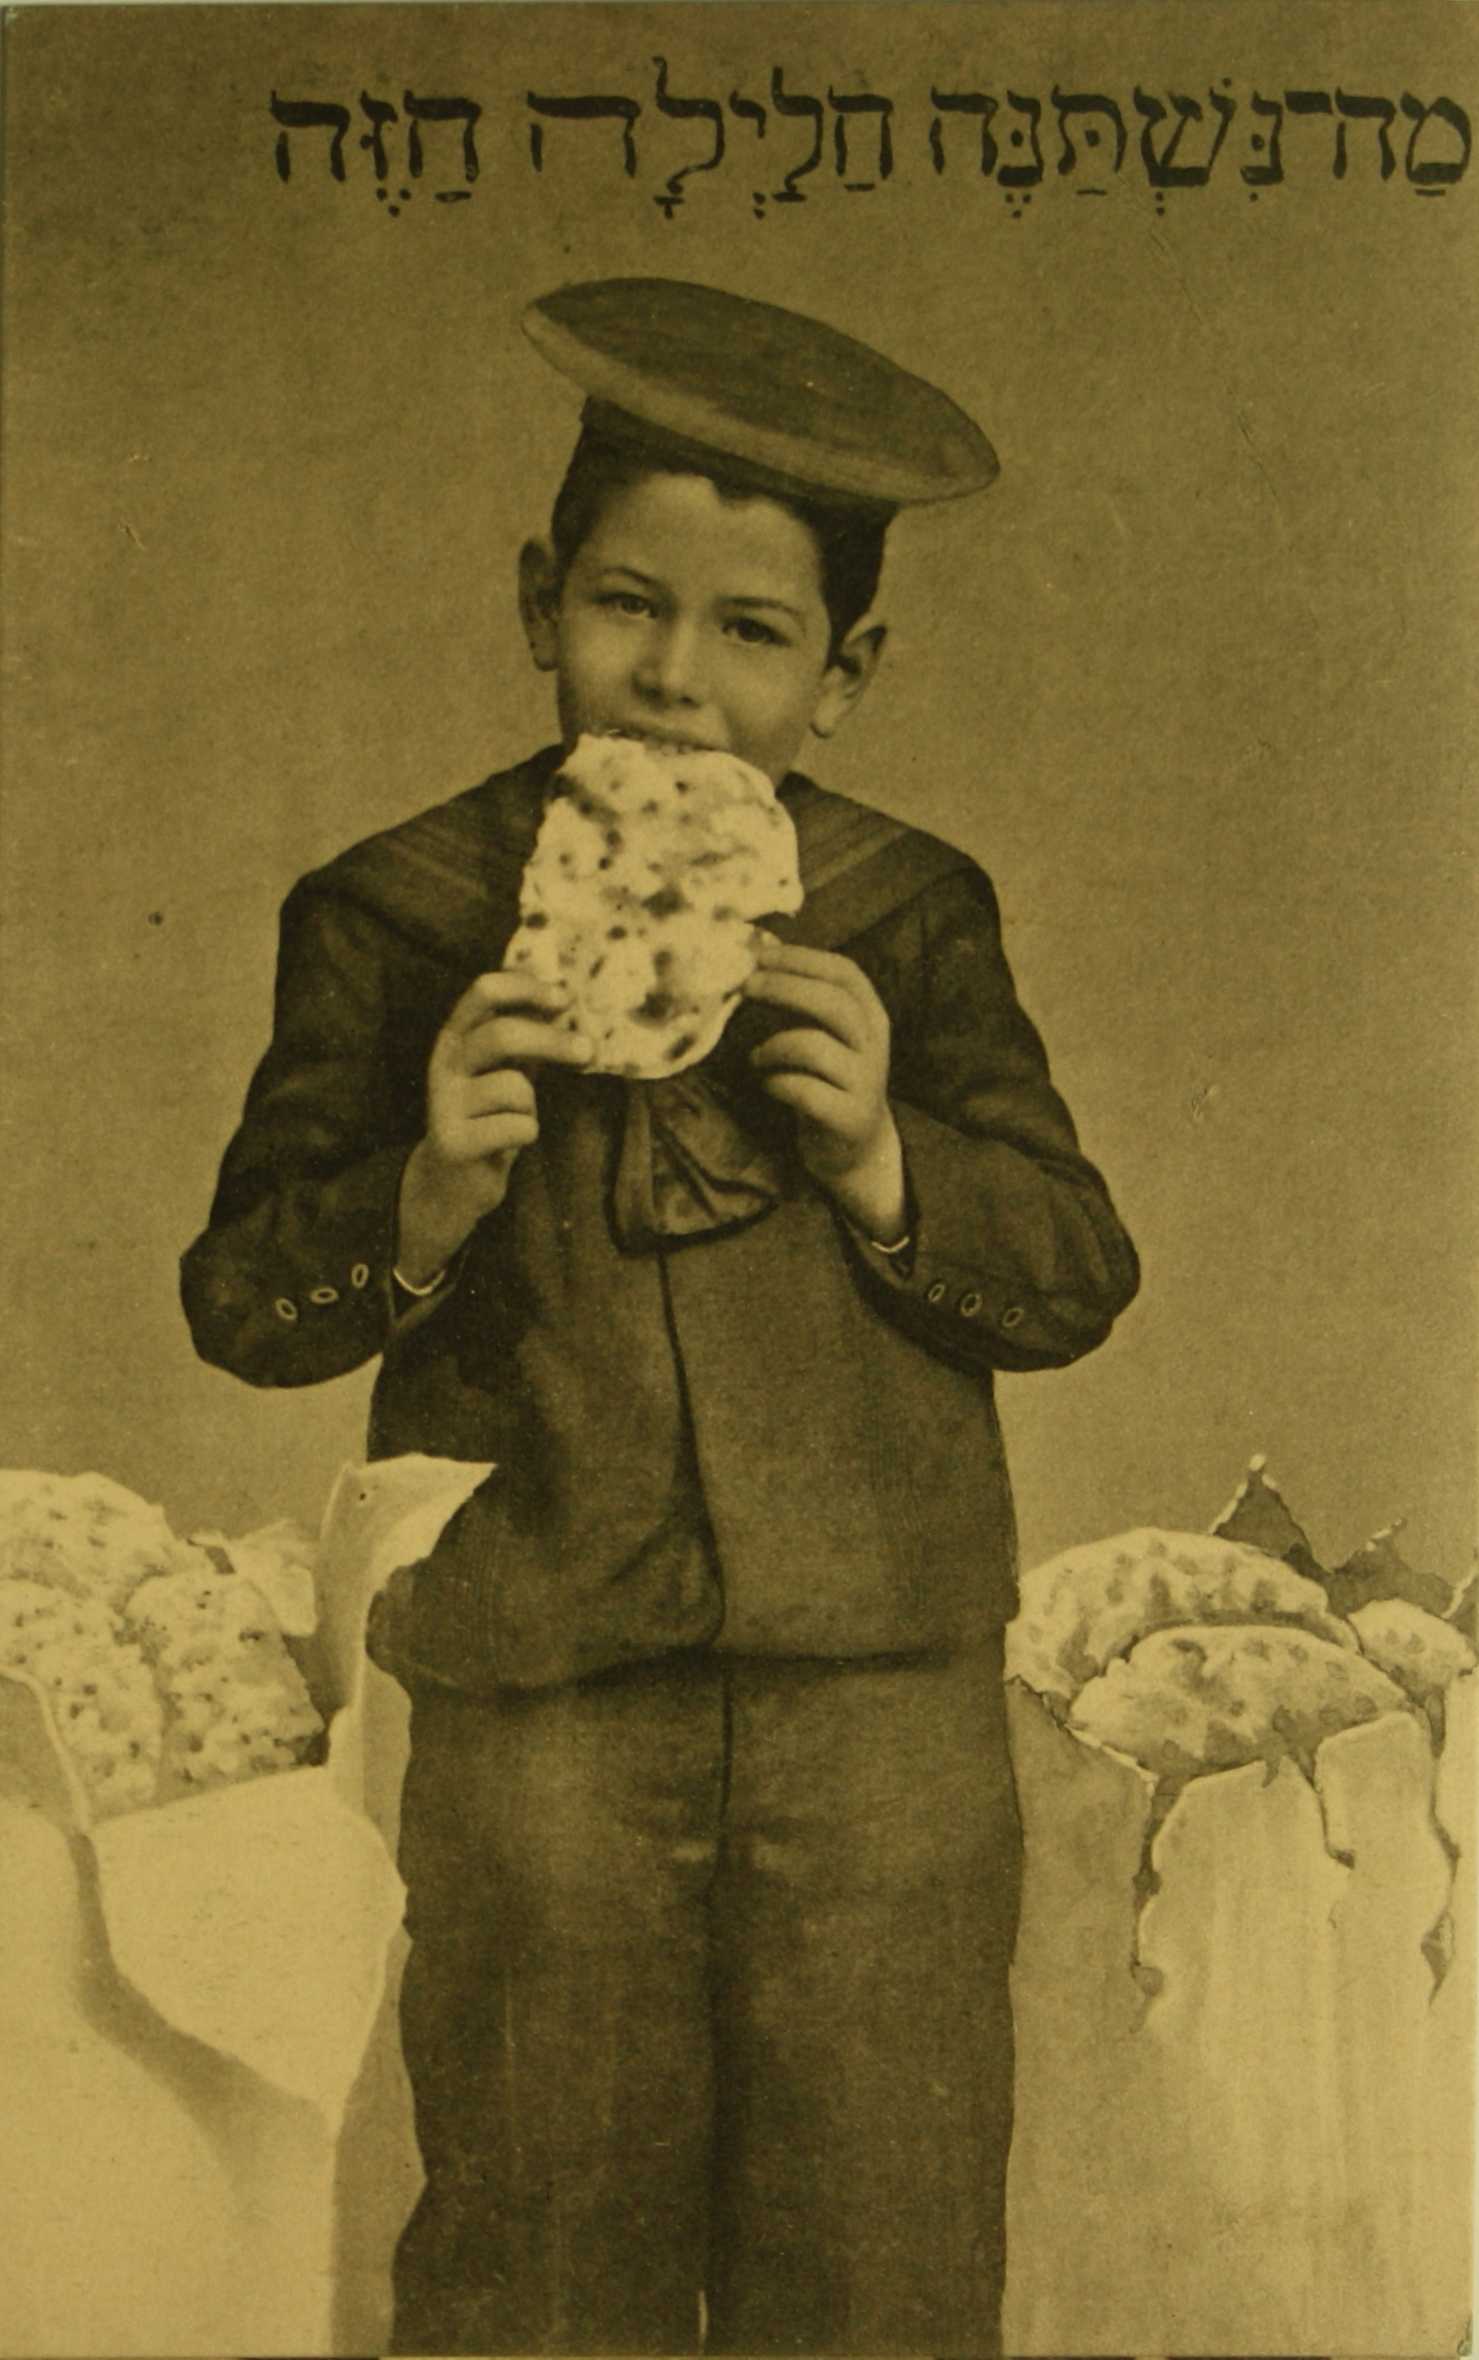 Image of boy eating matzah, shared by National Library of Israel